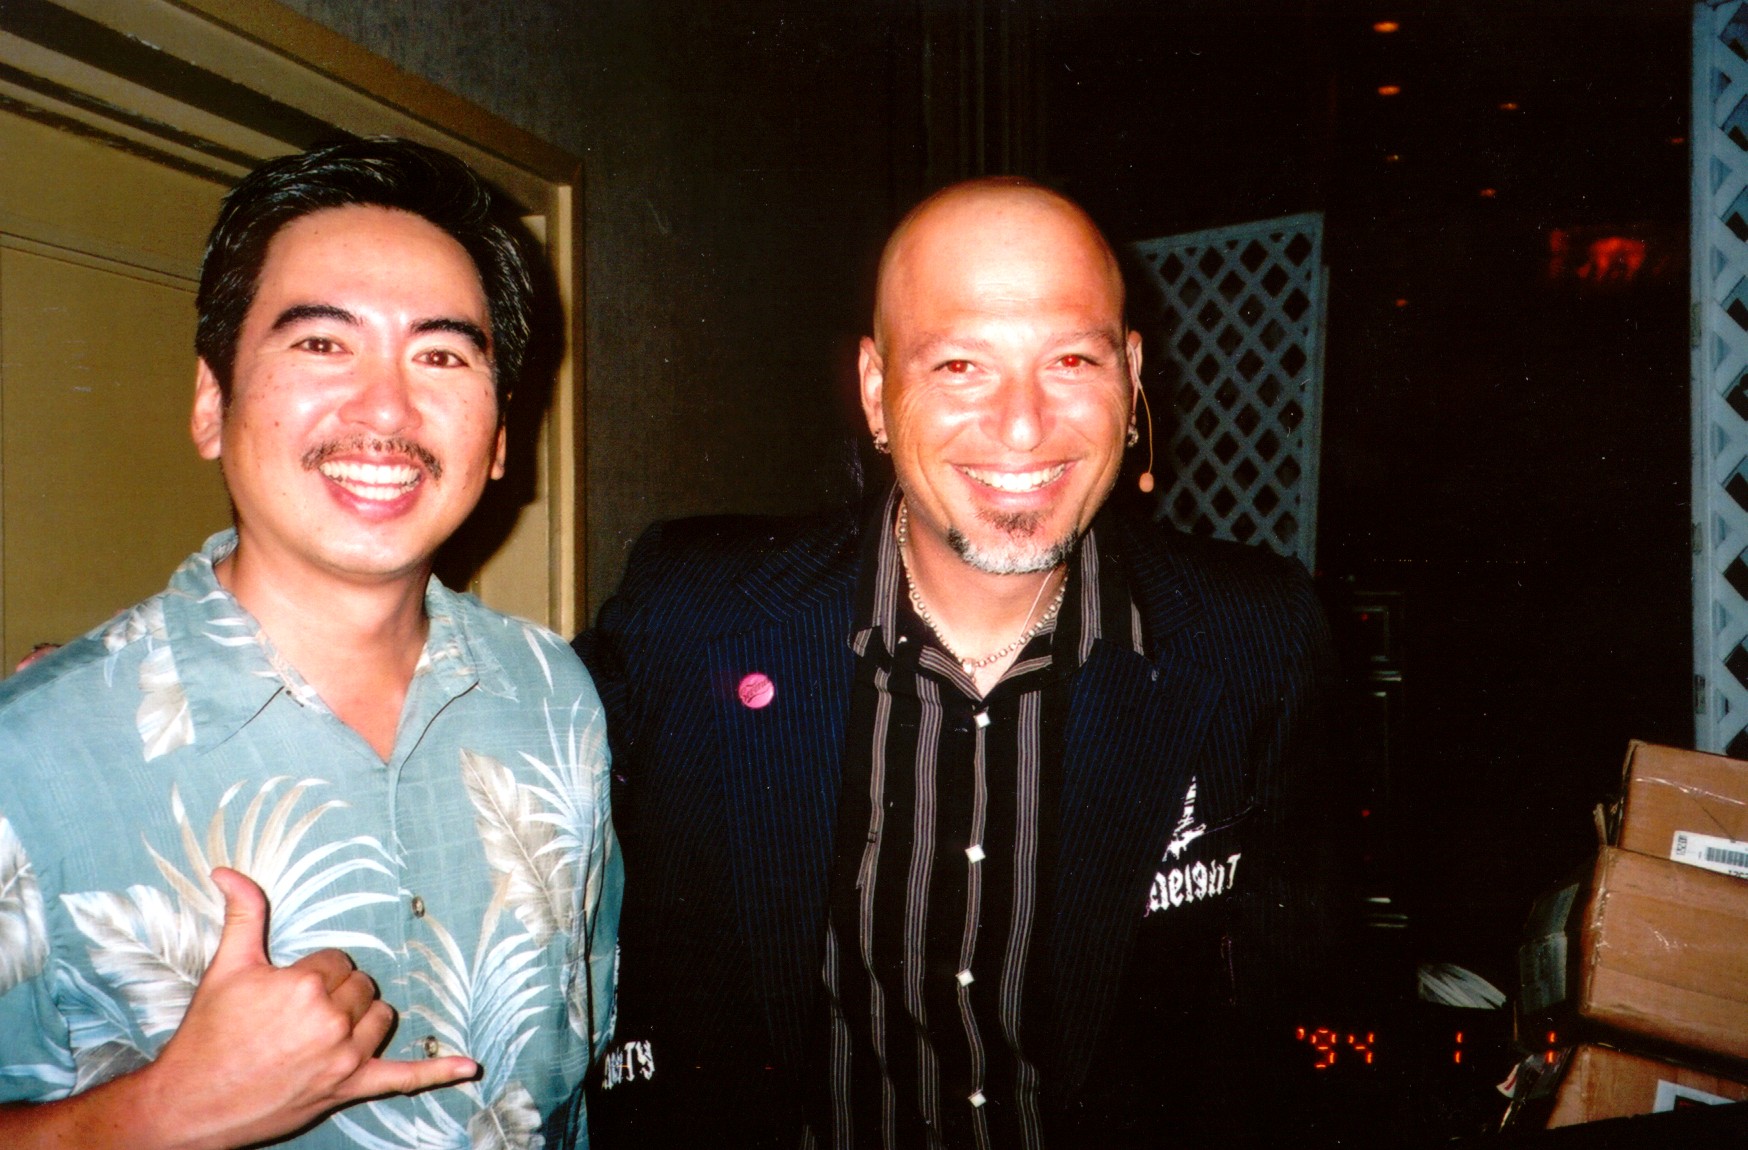 Stan Egi performing stand-up comedy as the opening act for Howie Mandel